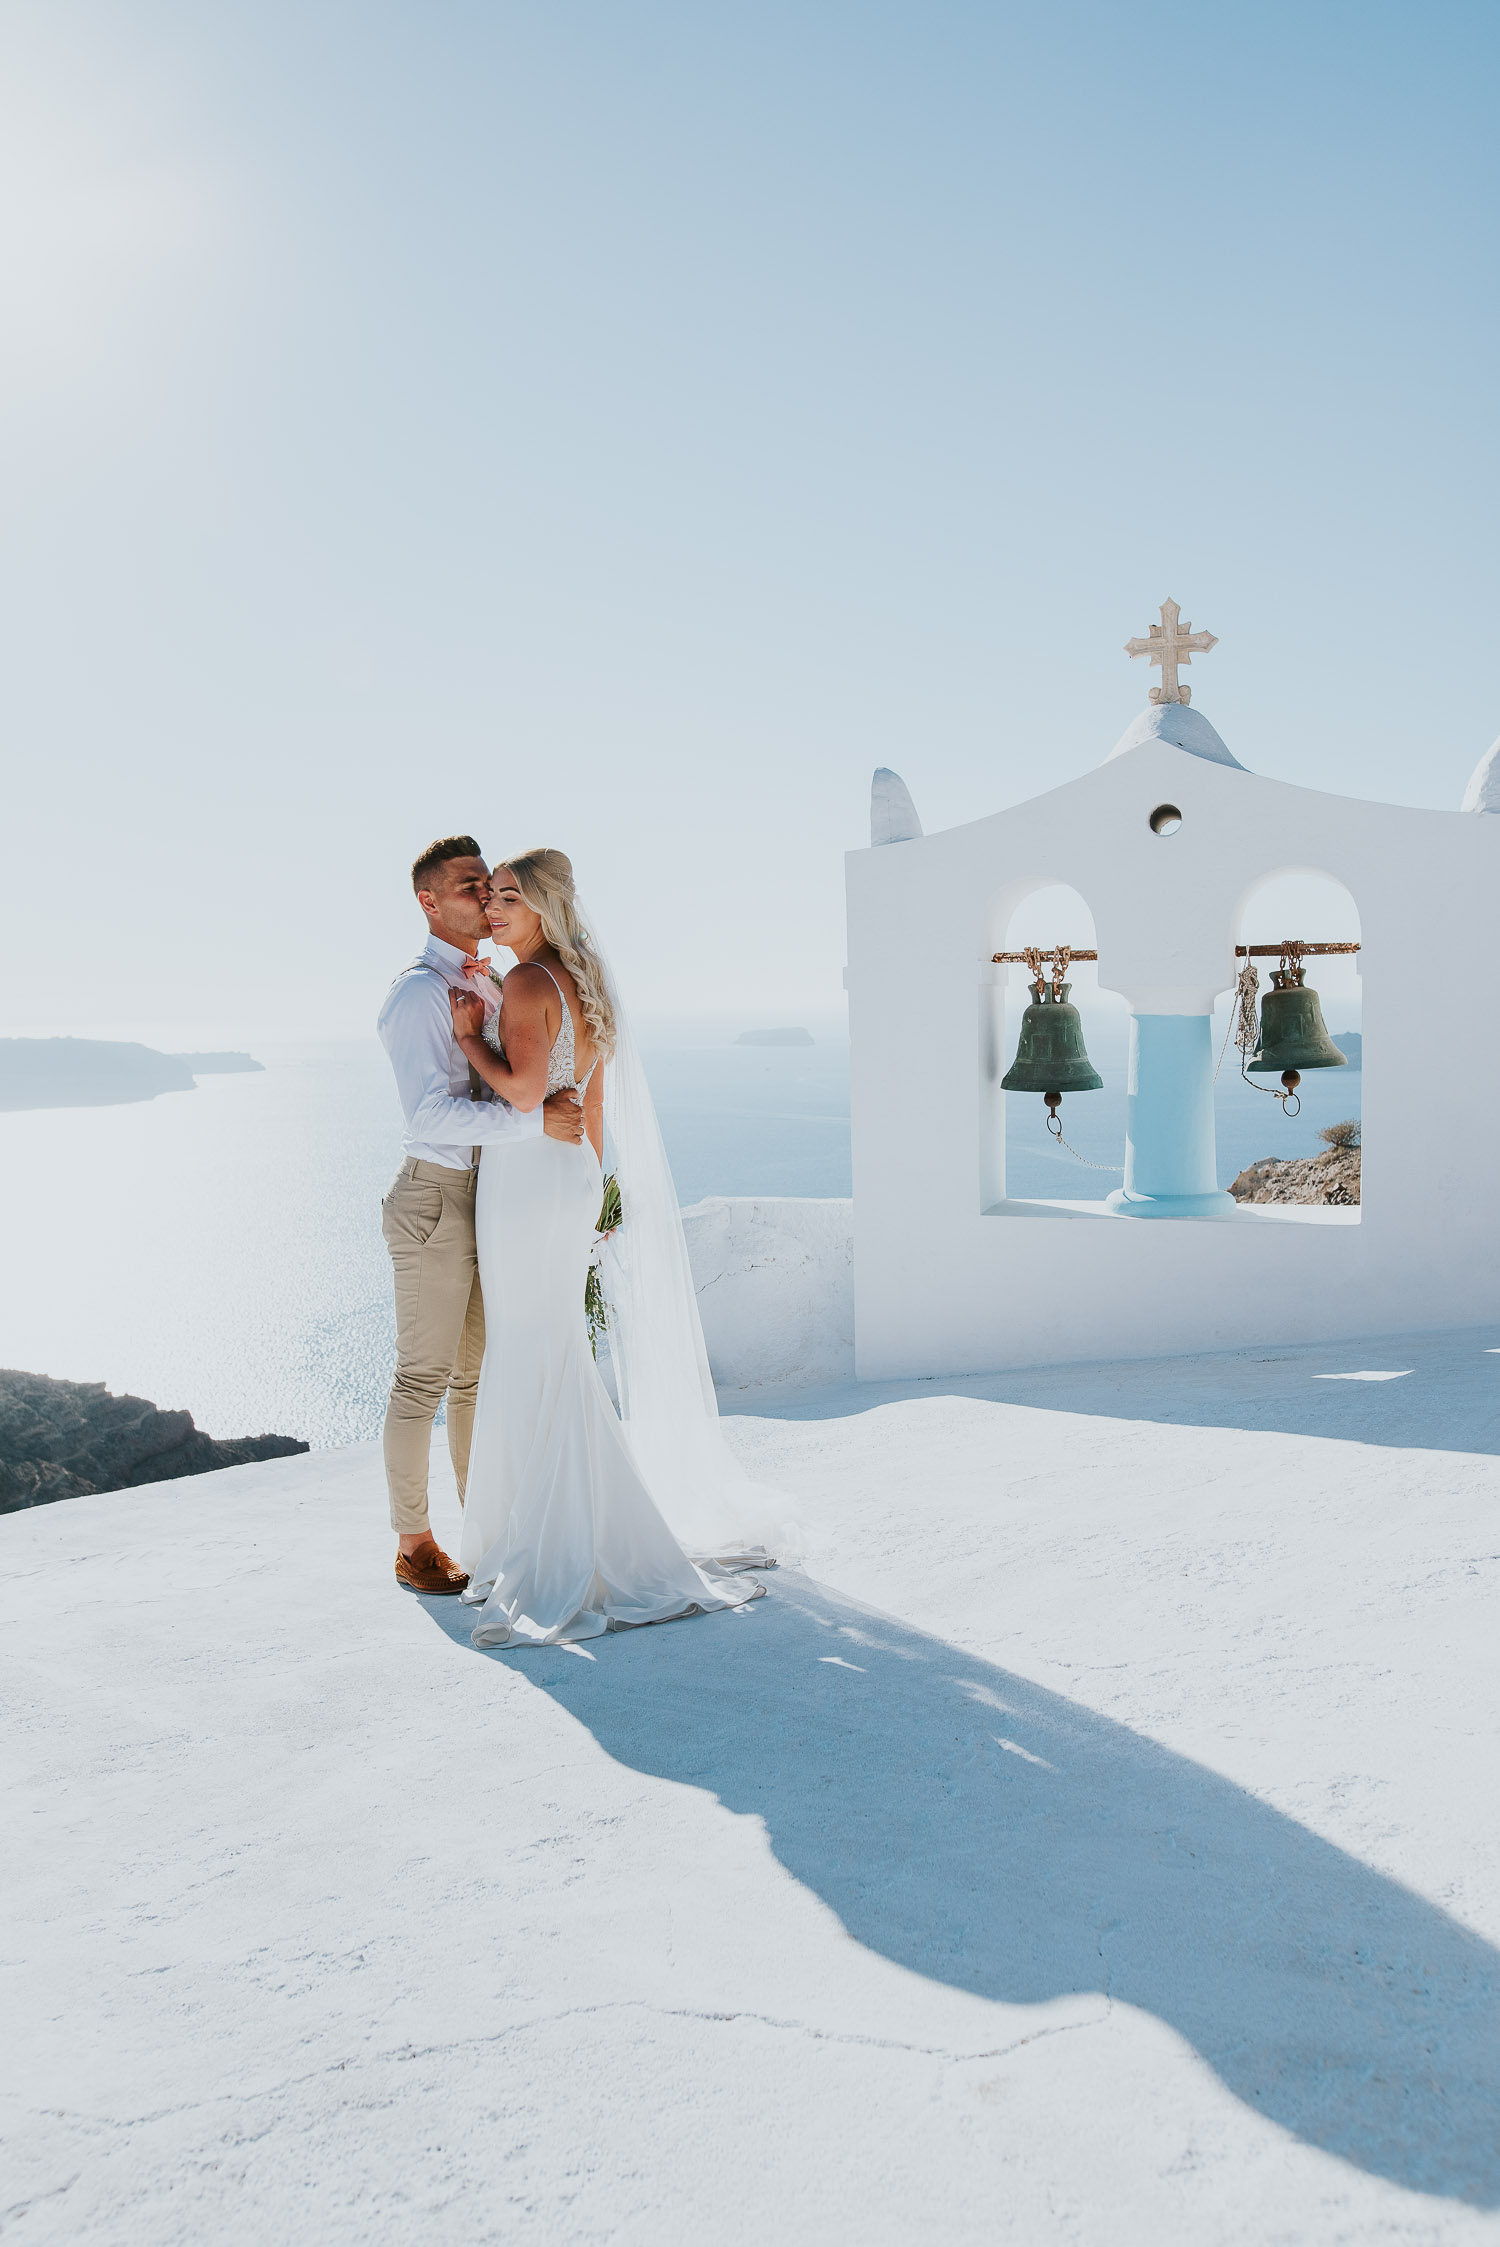 Wedding photographer Santorini: groom kissing bride on a cheek in front of the bell tower basked in the afternoon light by Ben and Vesna.